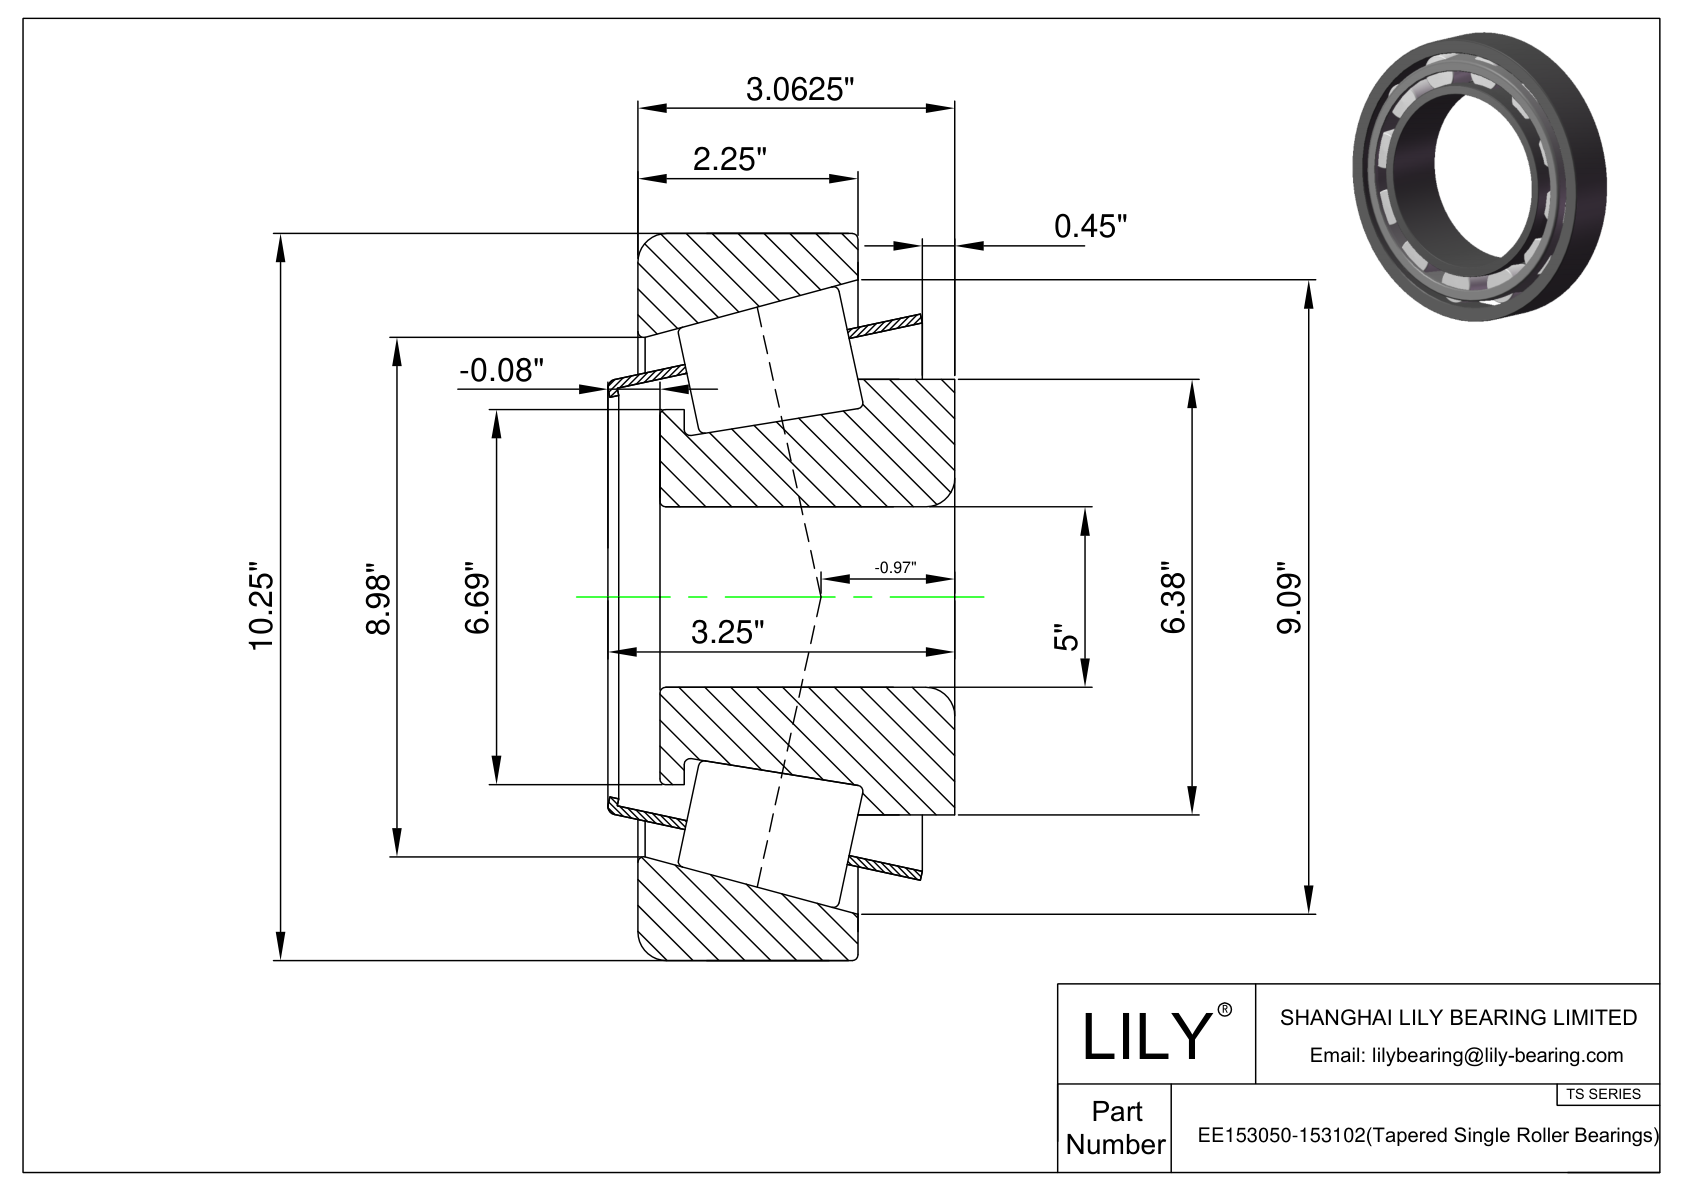 EE153050-153102 TS (Tapered Single Roller Bearings) (Imperial) cad drawing